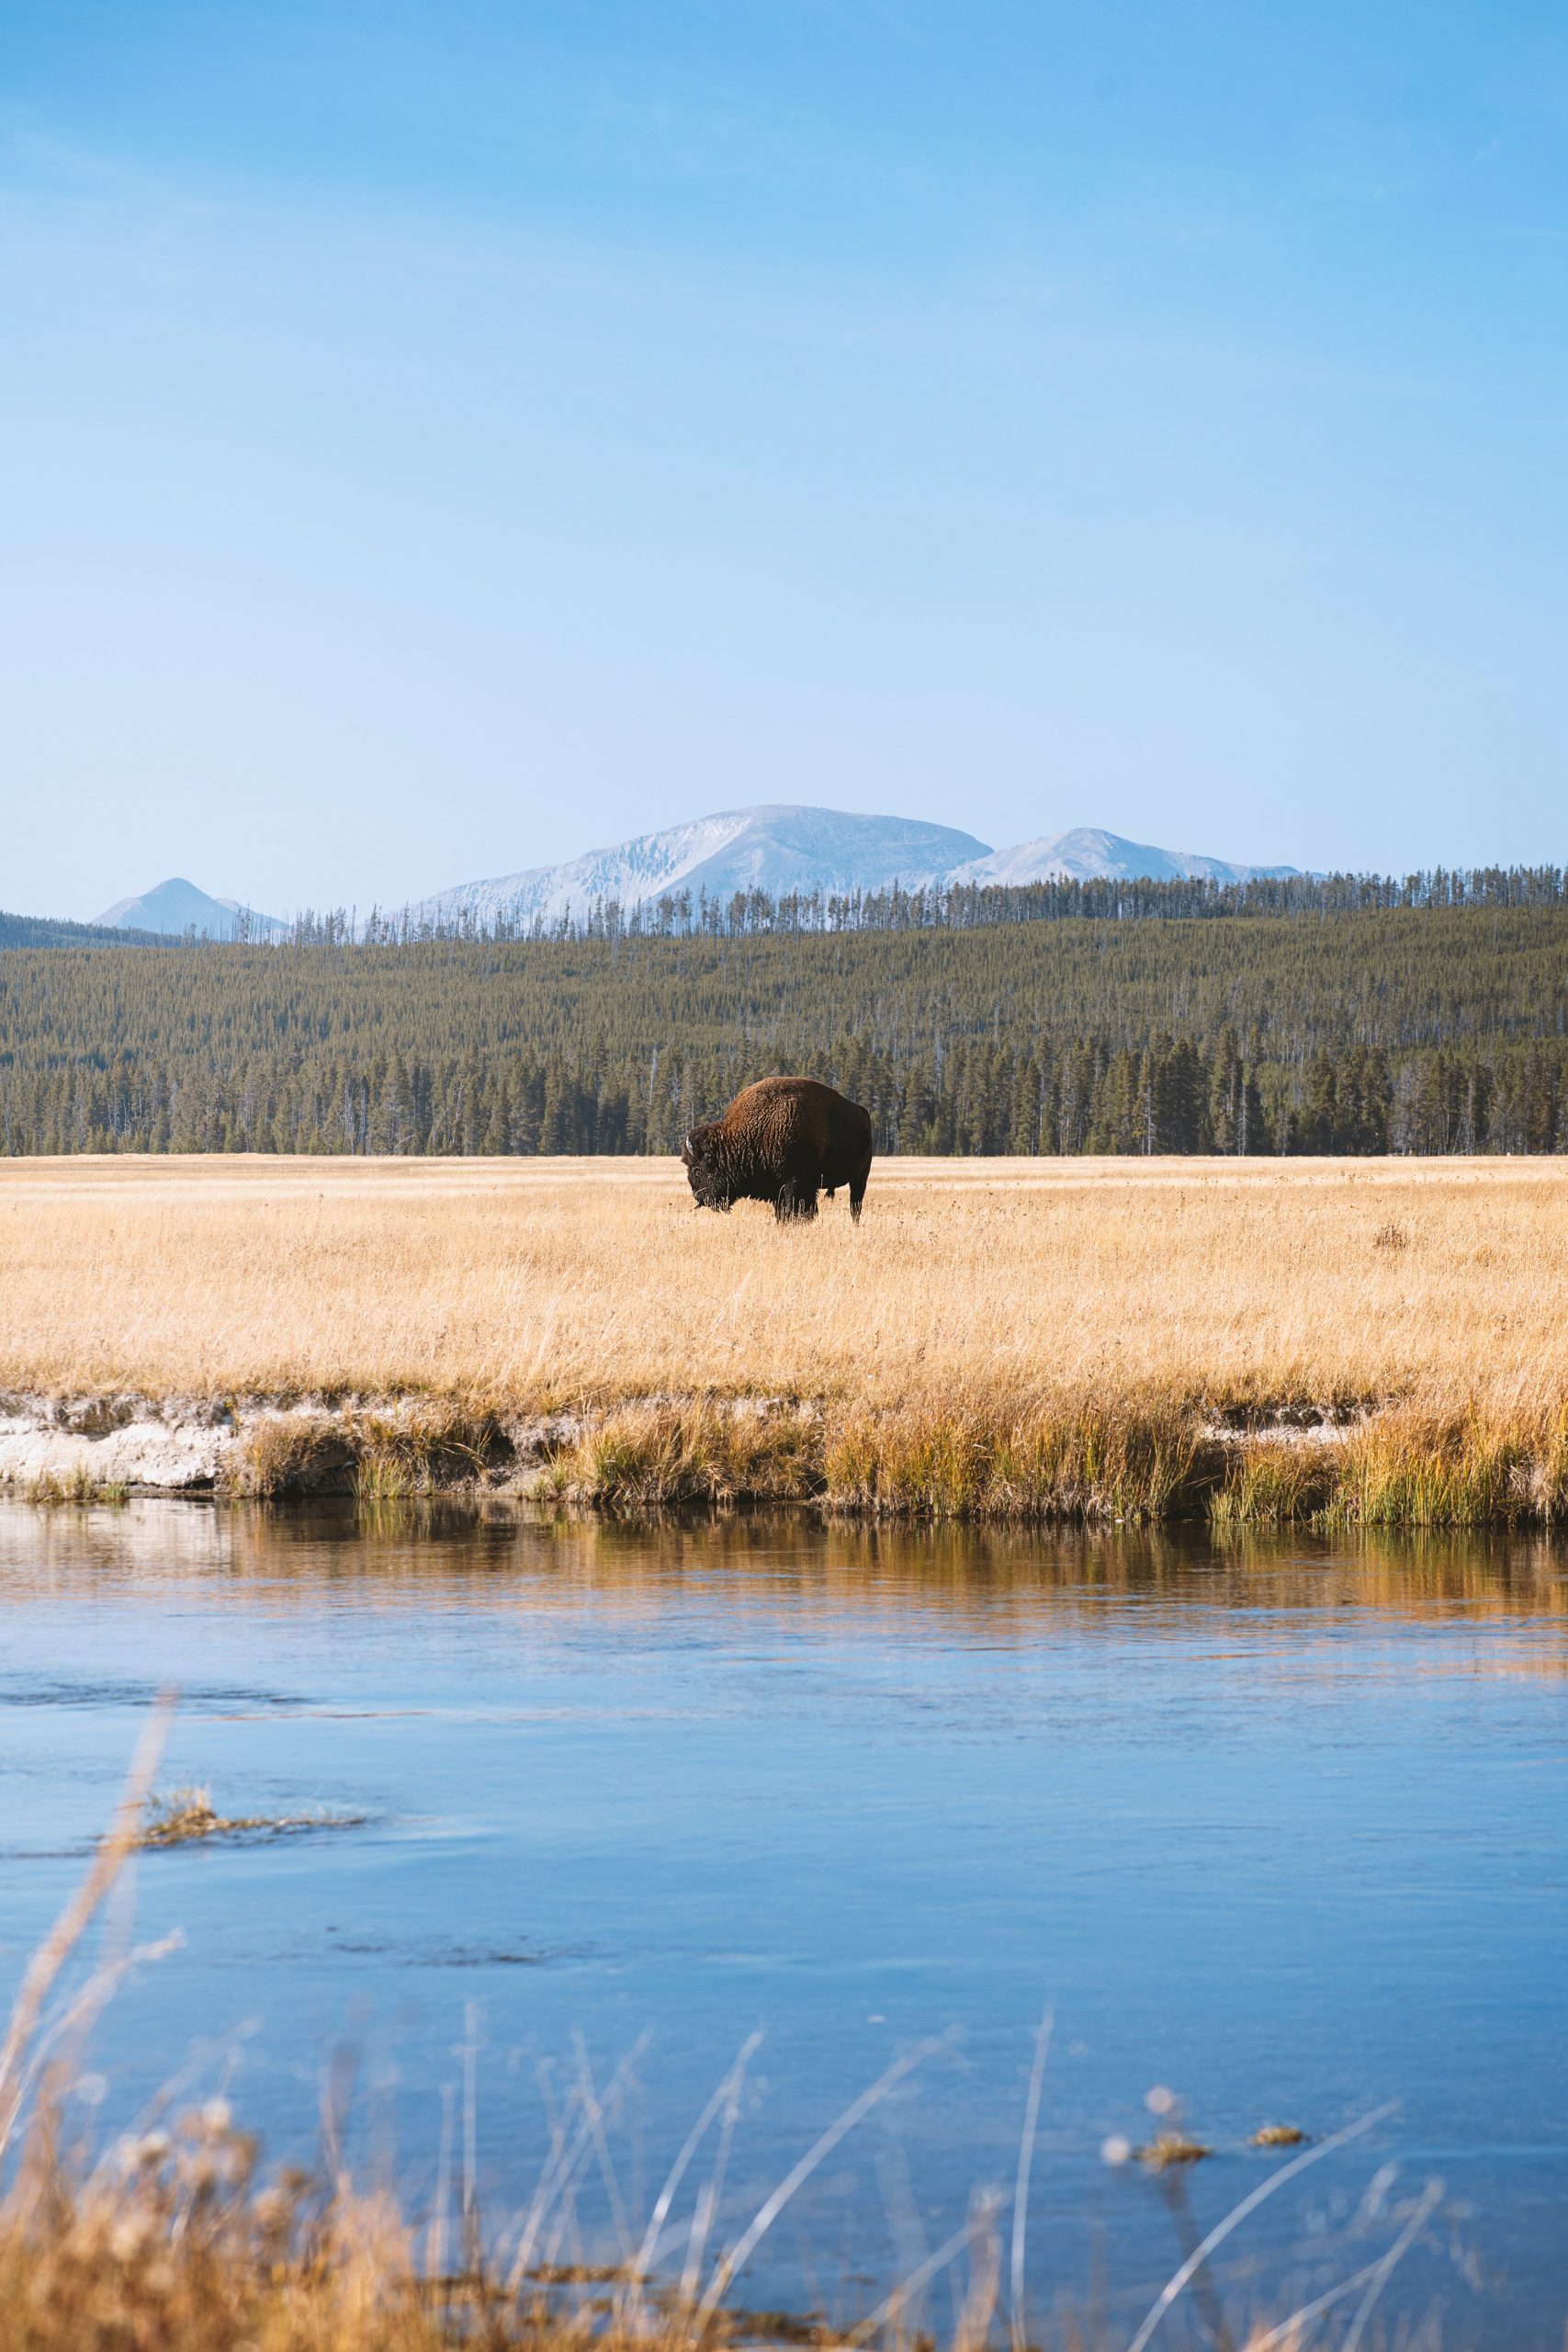 Wild bison in Yellowstone National Park, Wyoming, USA